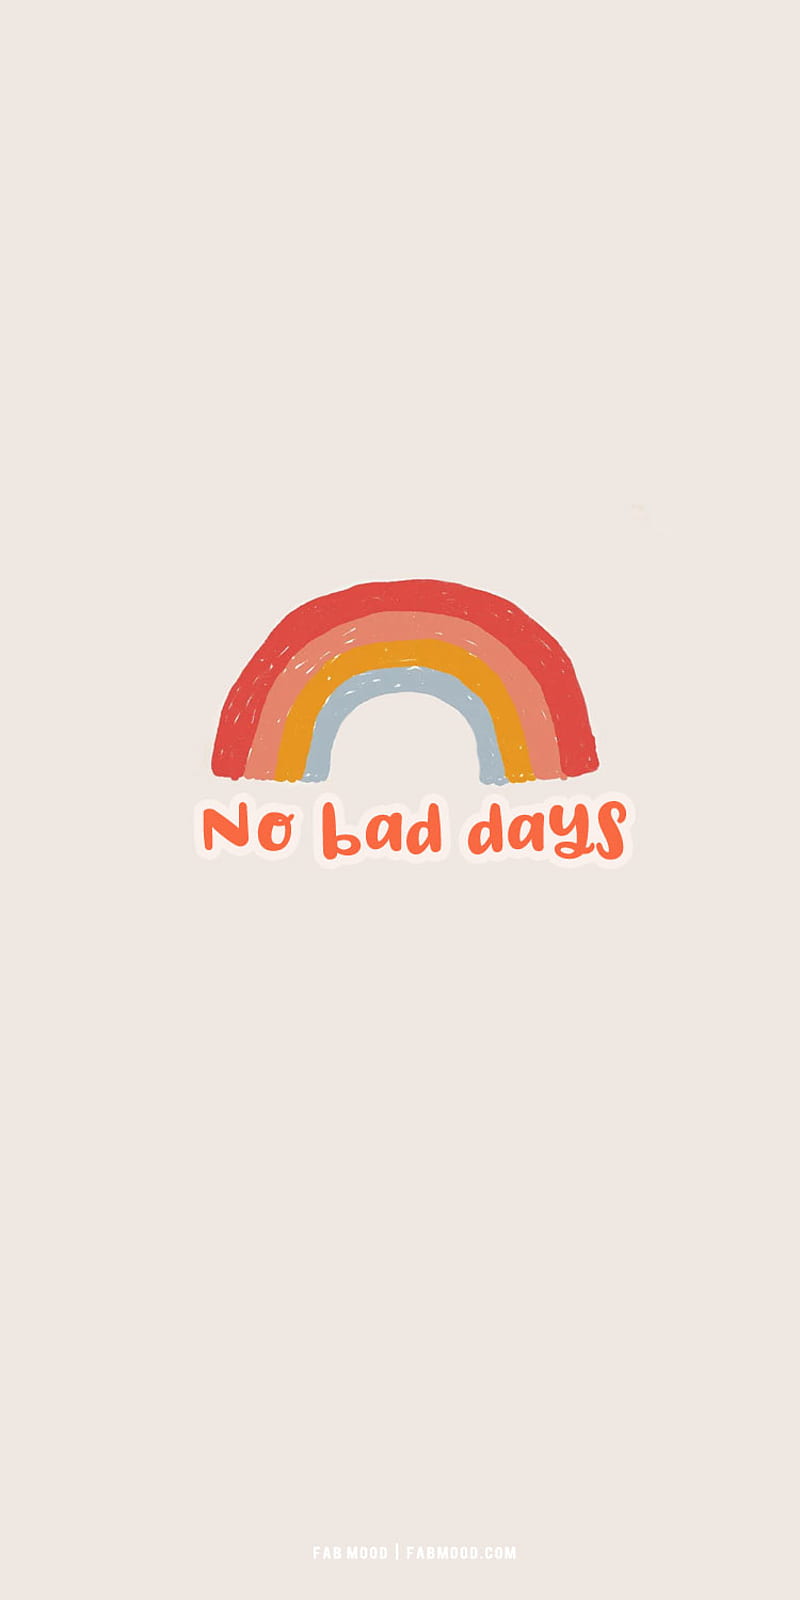 Cute Summer Ideas For iPhone & Phones : No Bad Days 1 - Fab Mood. Wedding Colours, Wedding Themes, Wedding colour palettes, HD phone wallpaper